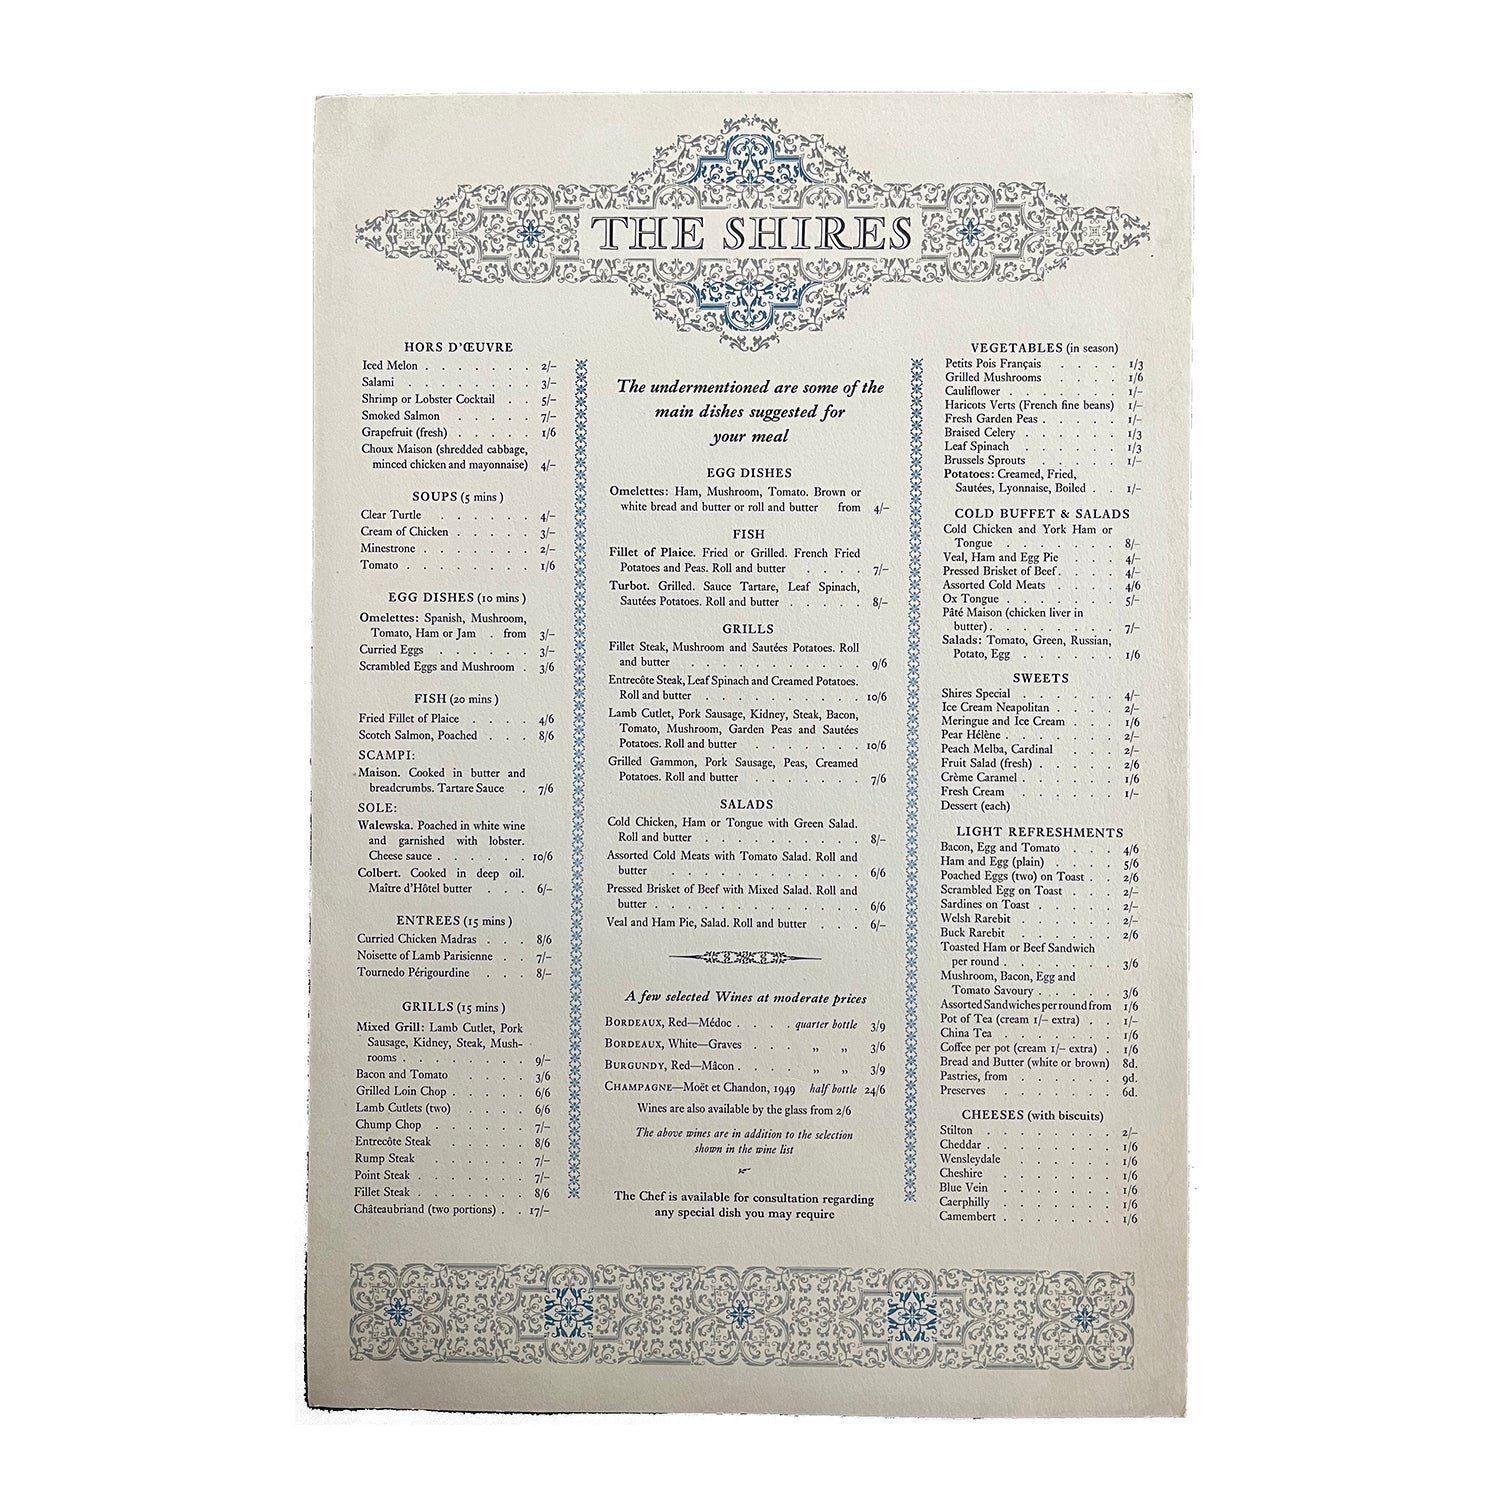 original railway hotel menu for the The Shires restaurant, Welcombe Hotel (Stratford Upon Avon), printed by the Curwen Press, c. 1960.